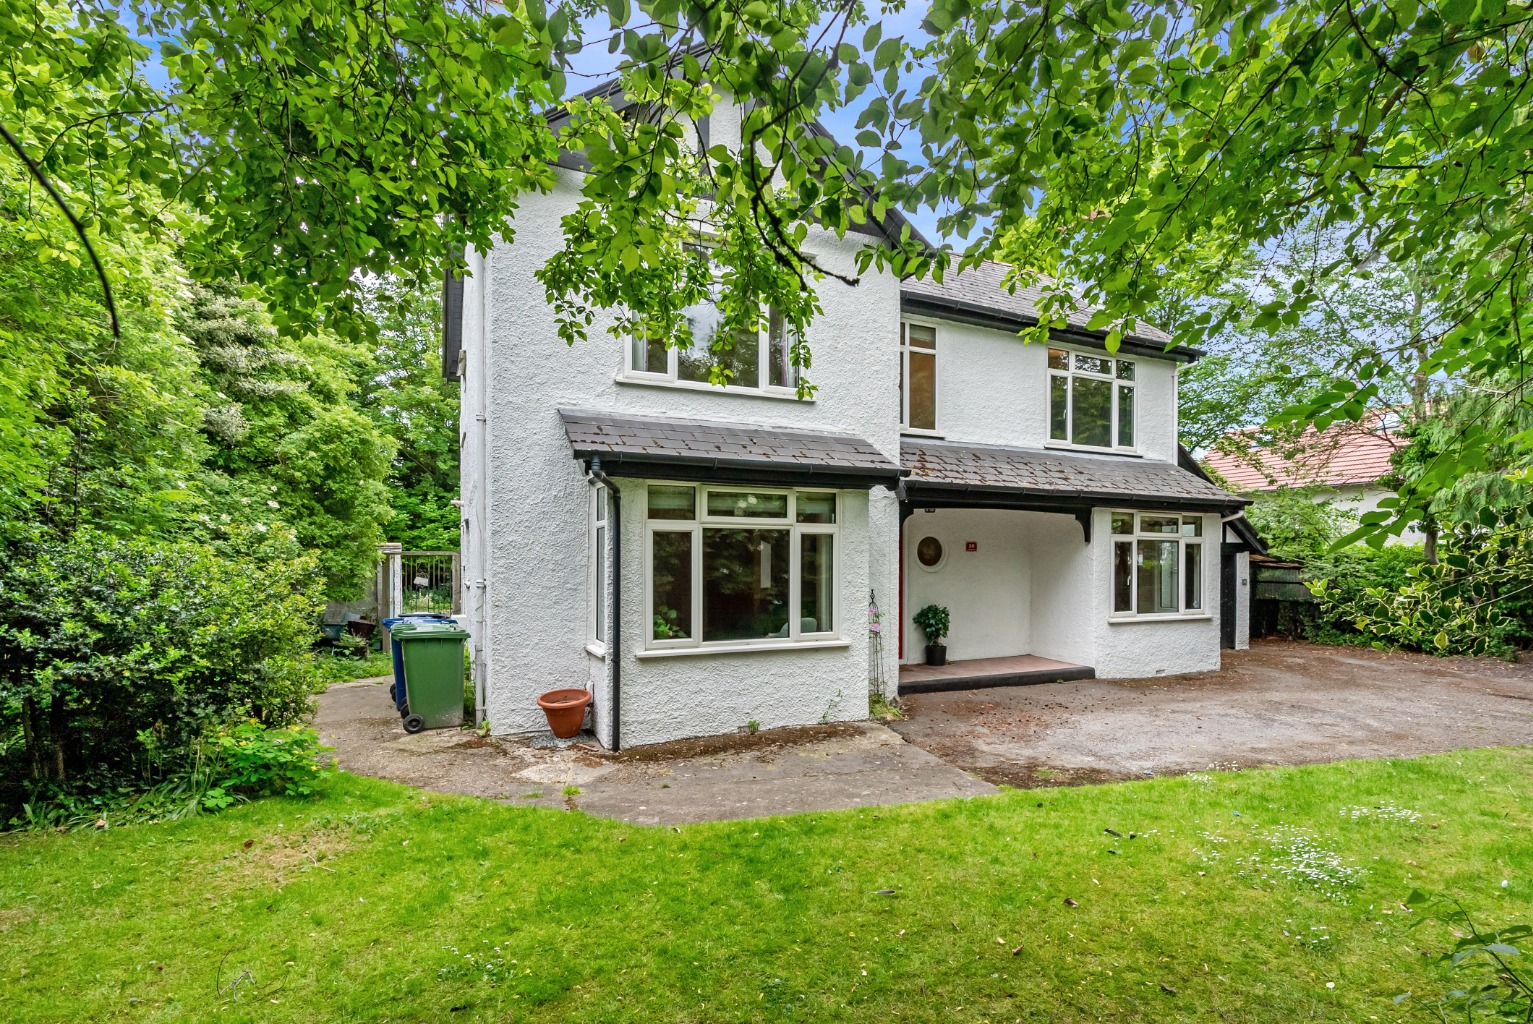 Set on a large plot, along a leafy street in the pretty Cambridgeshire village of Melbourn, 'Redcote' is a substantial 1930's, detached house, offering the right buyer a wealth of opportunity and potential to create something very special indeed.